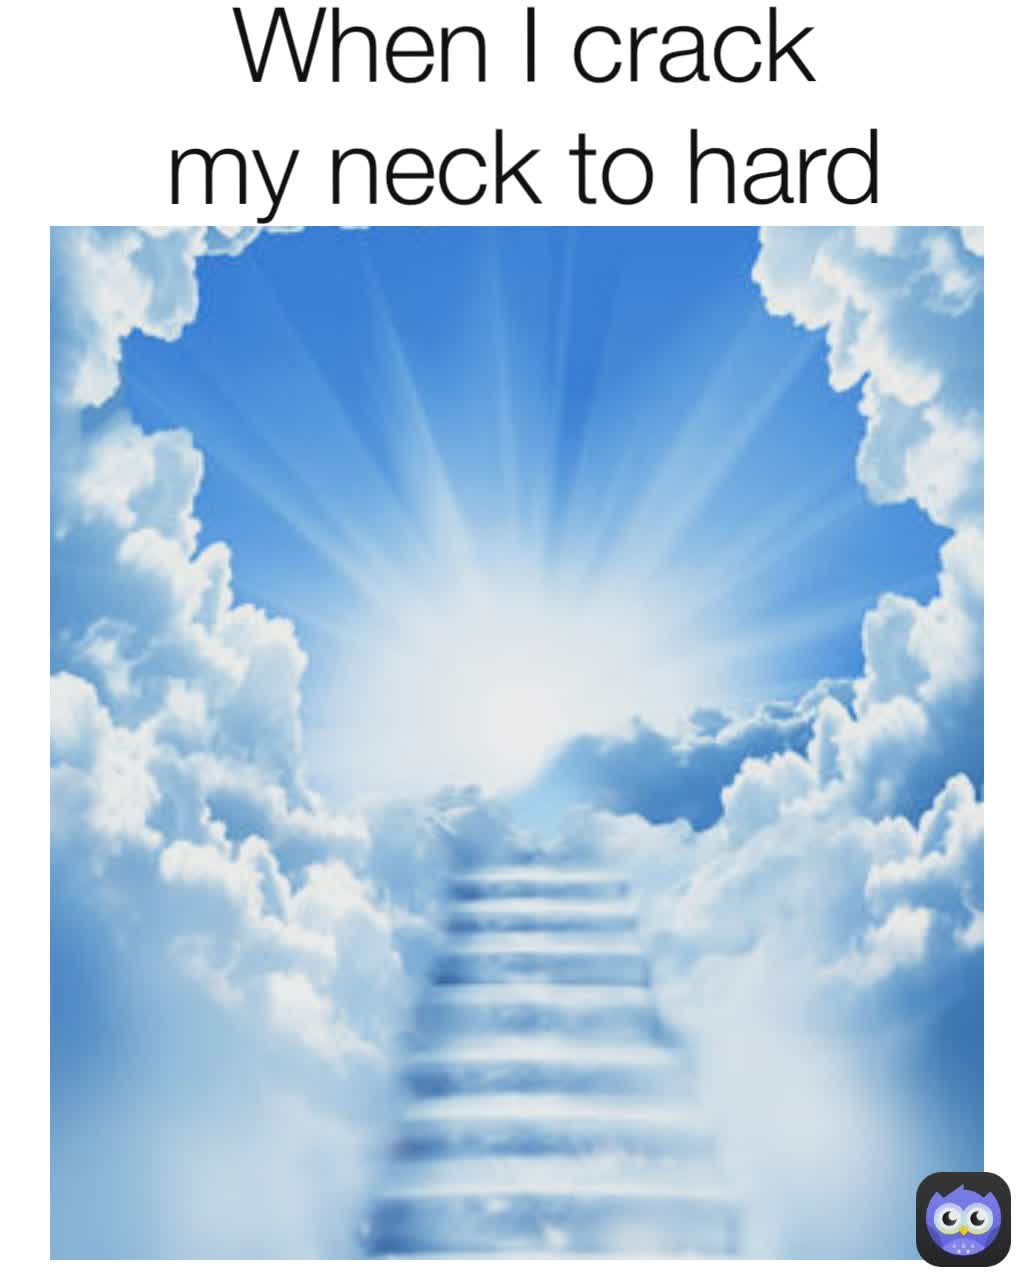 When I crack my neck to hard